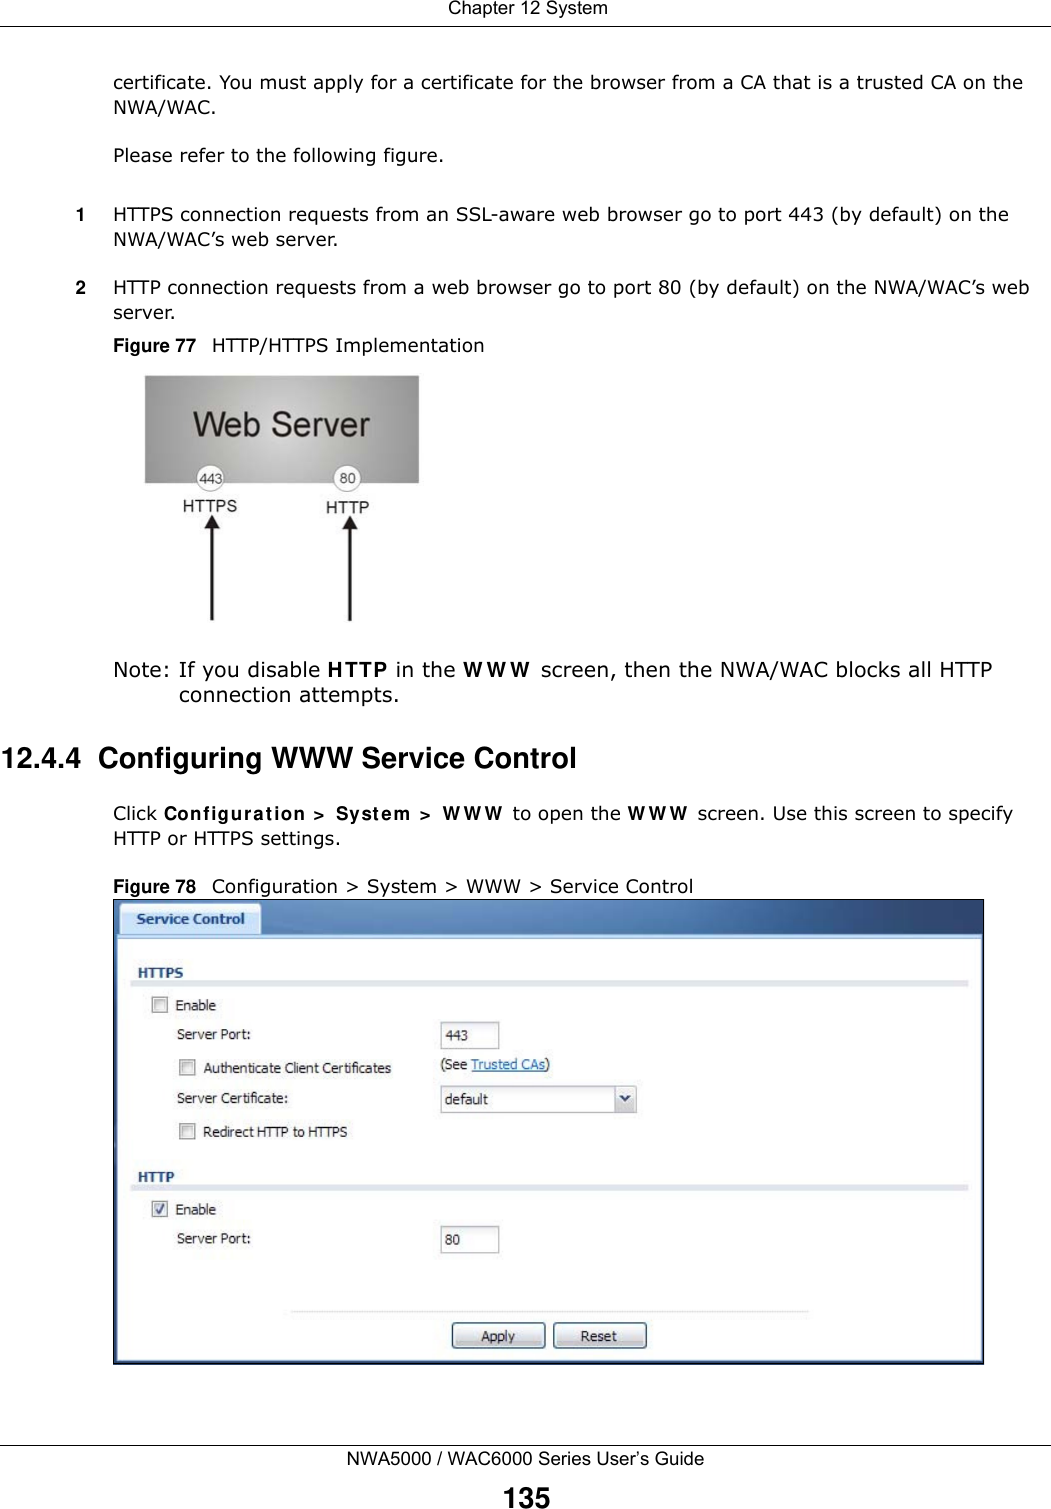  Chapter 12 SystemNWA5000 / WAC6000 Series User’s Guide135certificate. You must apply for a certificate for the browser from a CA that is a trusted CA on the NWA/WAC.Please refer to the following figure.1HTTPS connection requests from an SSL-aware web browser go to port 443 (by default) on the NWA/WAC’s web server.2HTTP connection requests from a web browser go to port 80 (by default) on the NWA/WAC’s web server.Figure 77   HTTP/HTTPS ImplementationNote: If you disable HTTP in the WWW screen, then the NWA/WAC blocks all HTTP connection attempts.12.4.4  Configuring WWW Service ControlClick Configuration &gt; System &gt; WWW to open the WWW screen. Use this screen to specify HTTP or HTTPS settings. Figure 78   Configuration &gt; System &gt; WWW &gt; Service Control